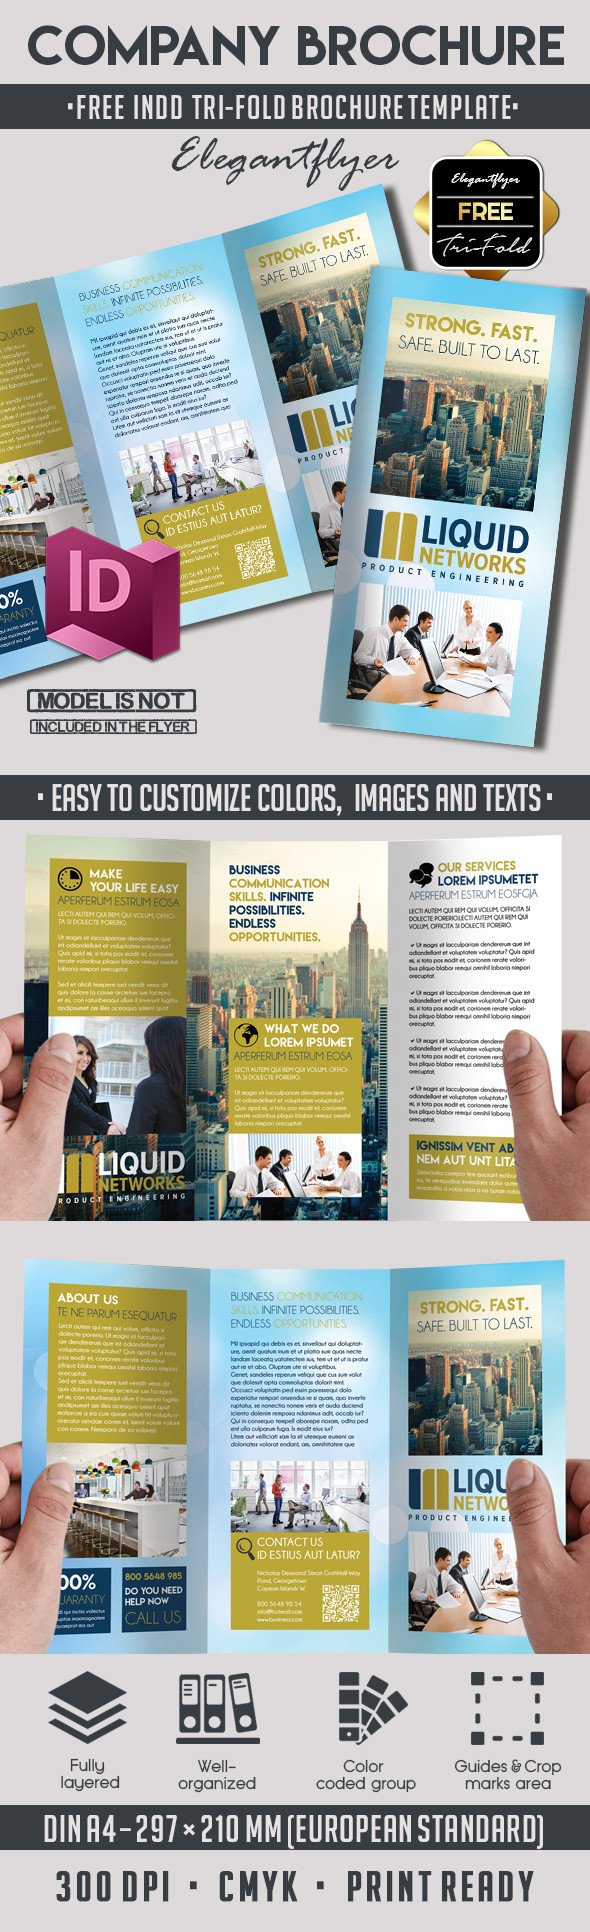 Free Indesign Flyer Templates 5 Powerful Free Adobe Indesign Brochures Templates – by